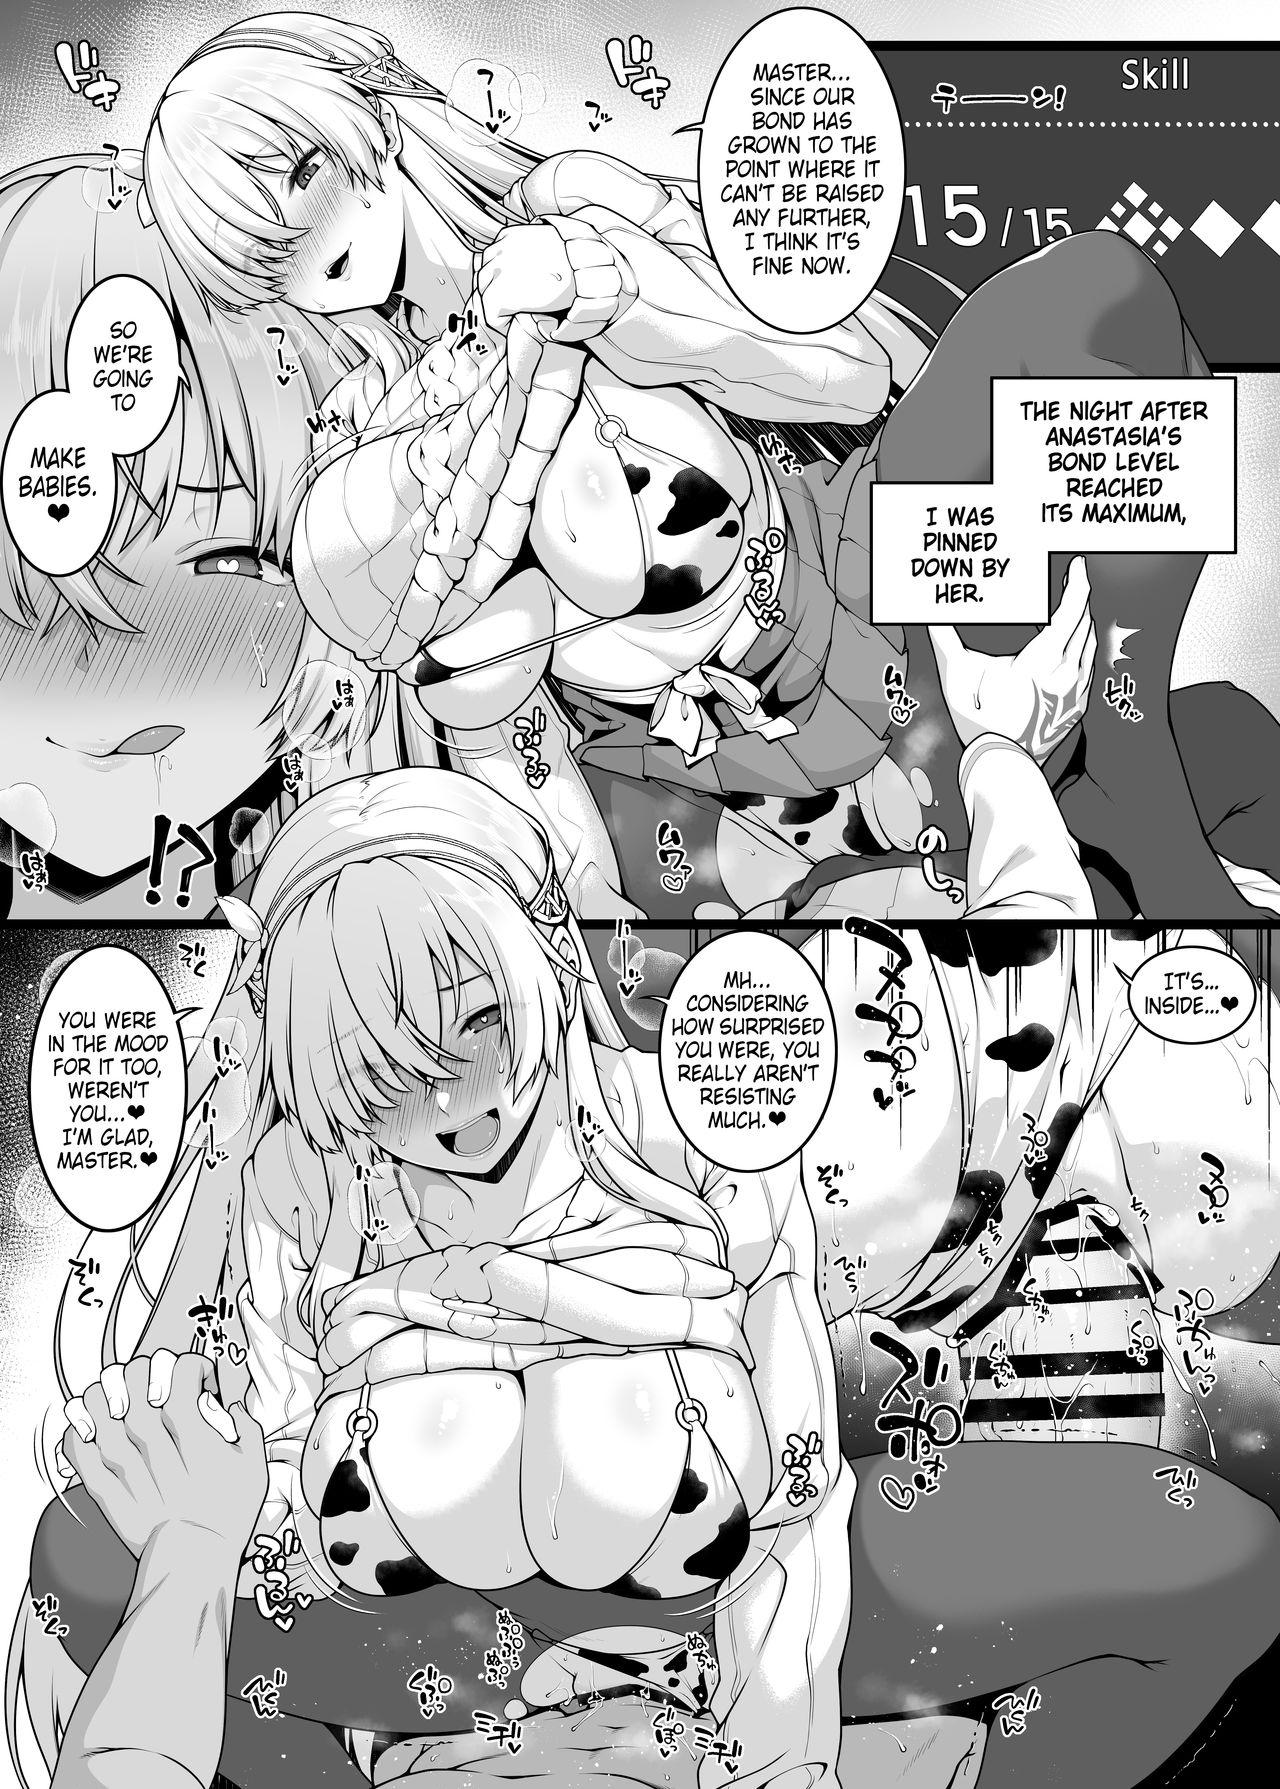 Masterbation Having Lovey-Dovey Baby Making Sex With Anastasia - Fate grand order Anale - Picture 1